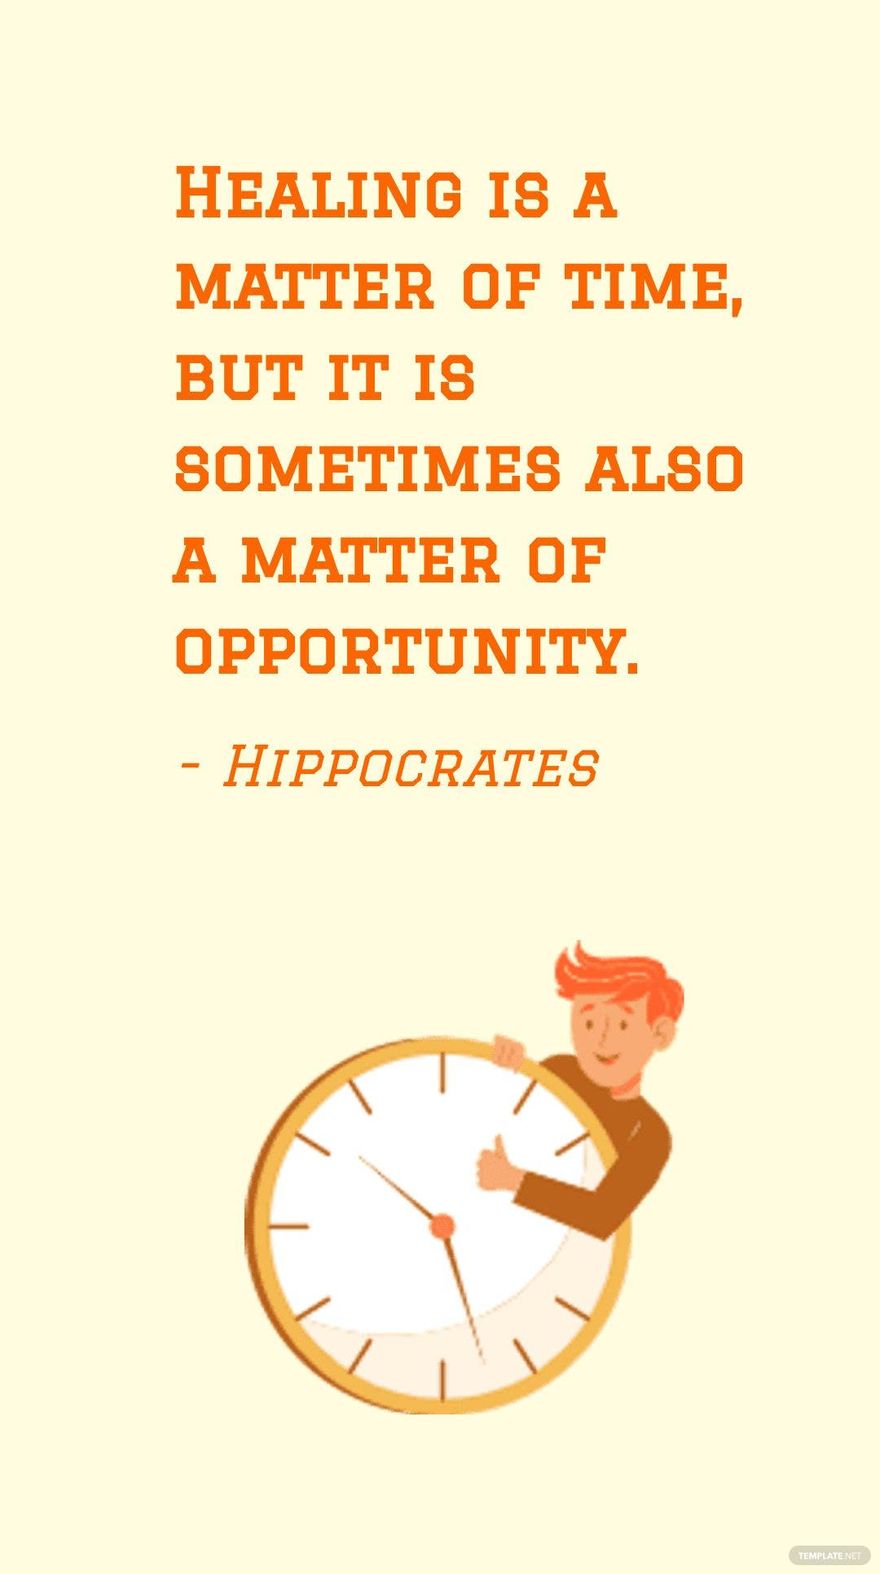 Hippocrates - Healing is a matter of time, but it is sometimes also a matter of opportunity.